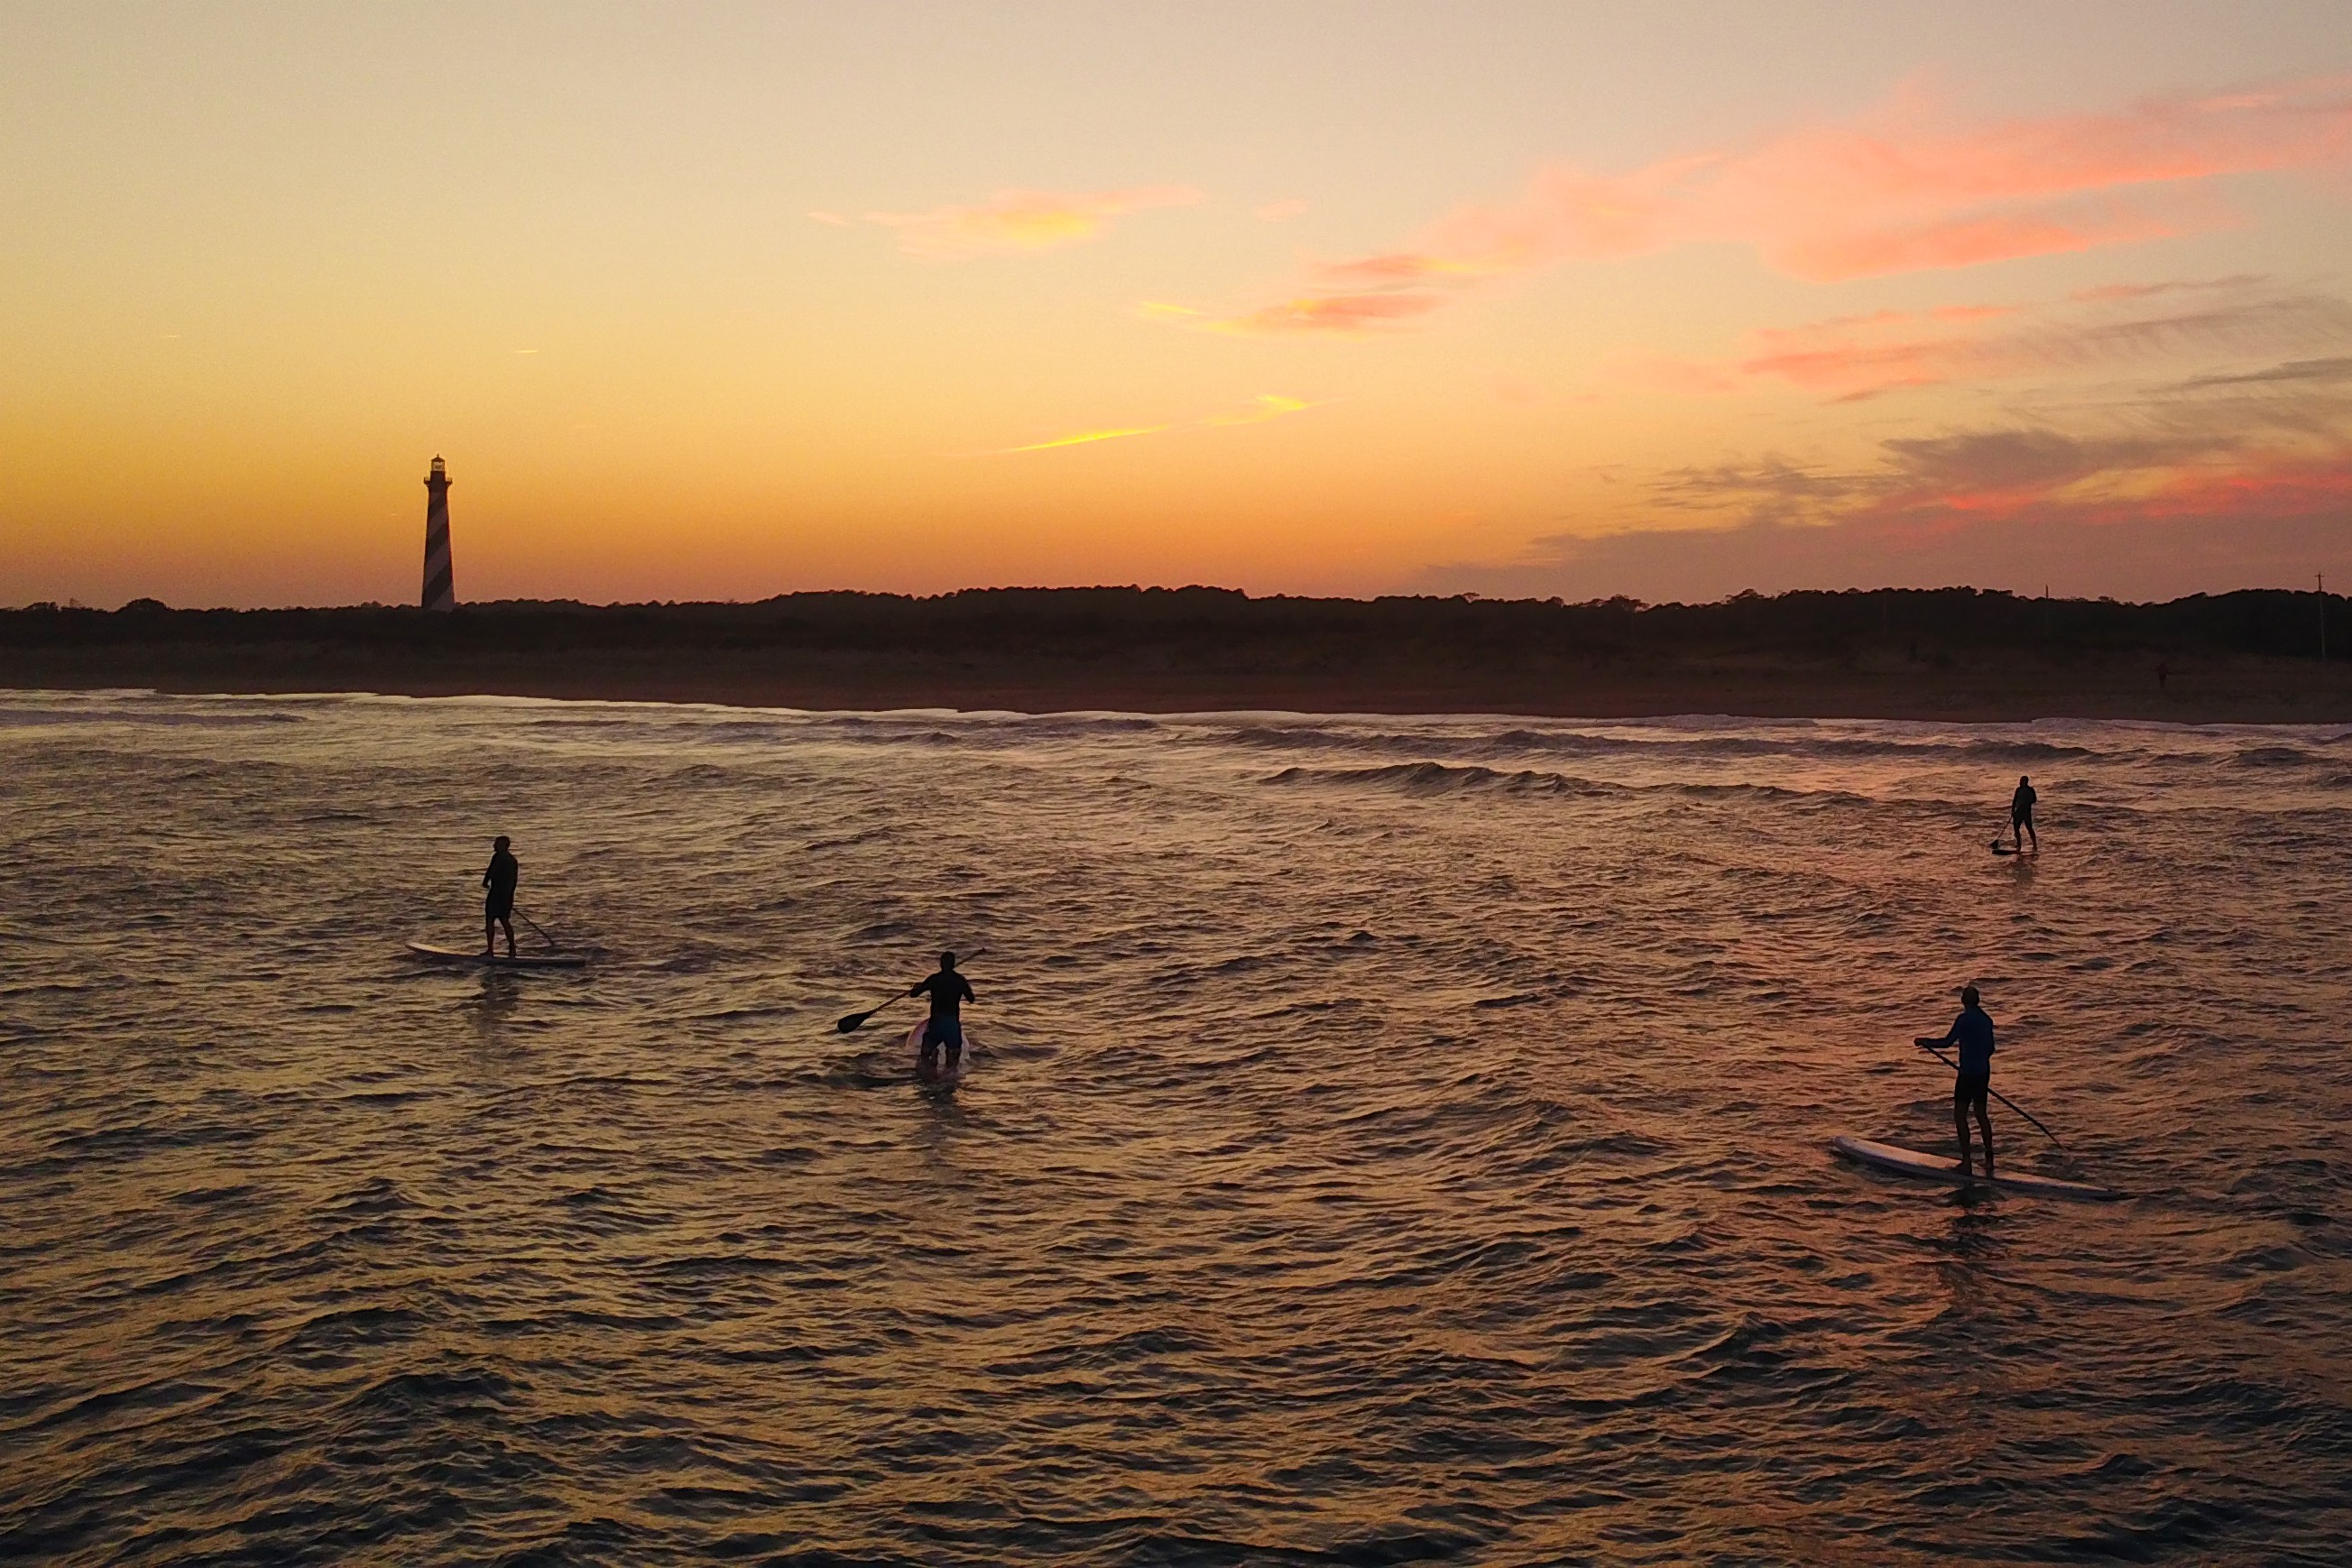 DJI Mavic shooting sunset SUP sessions at the Cape Hatteras lighthouse